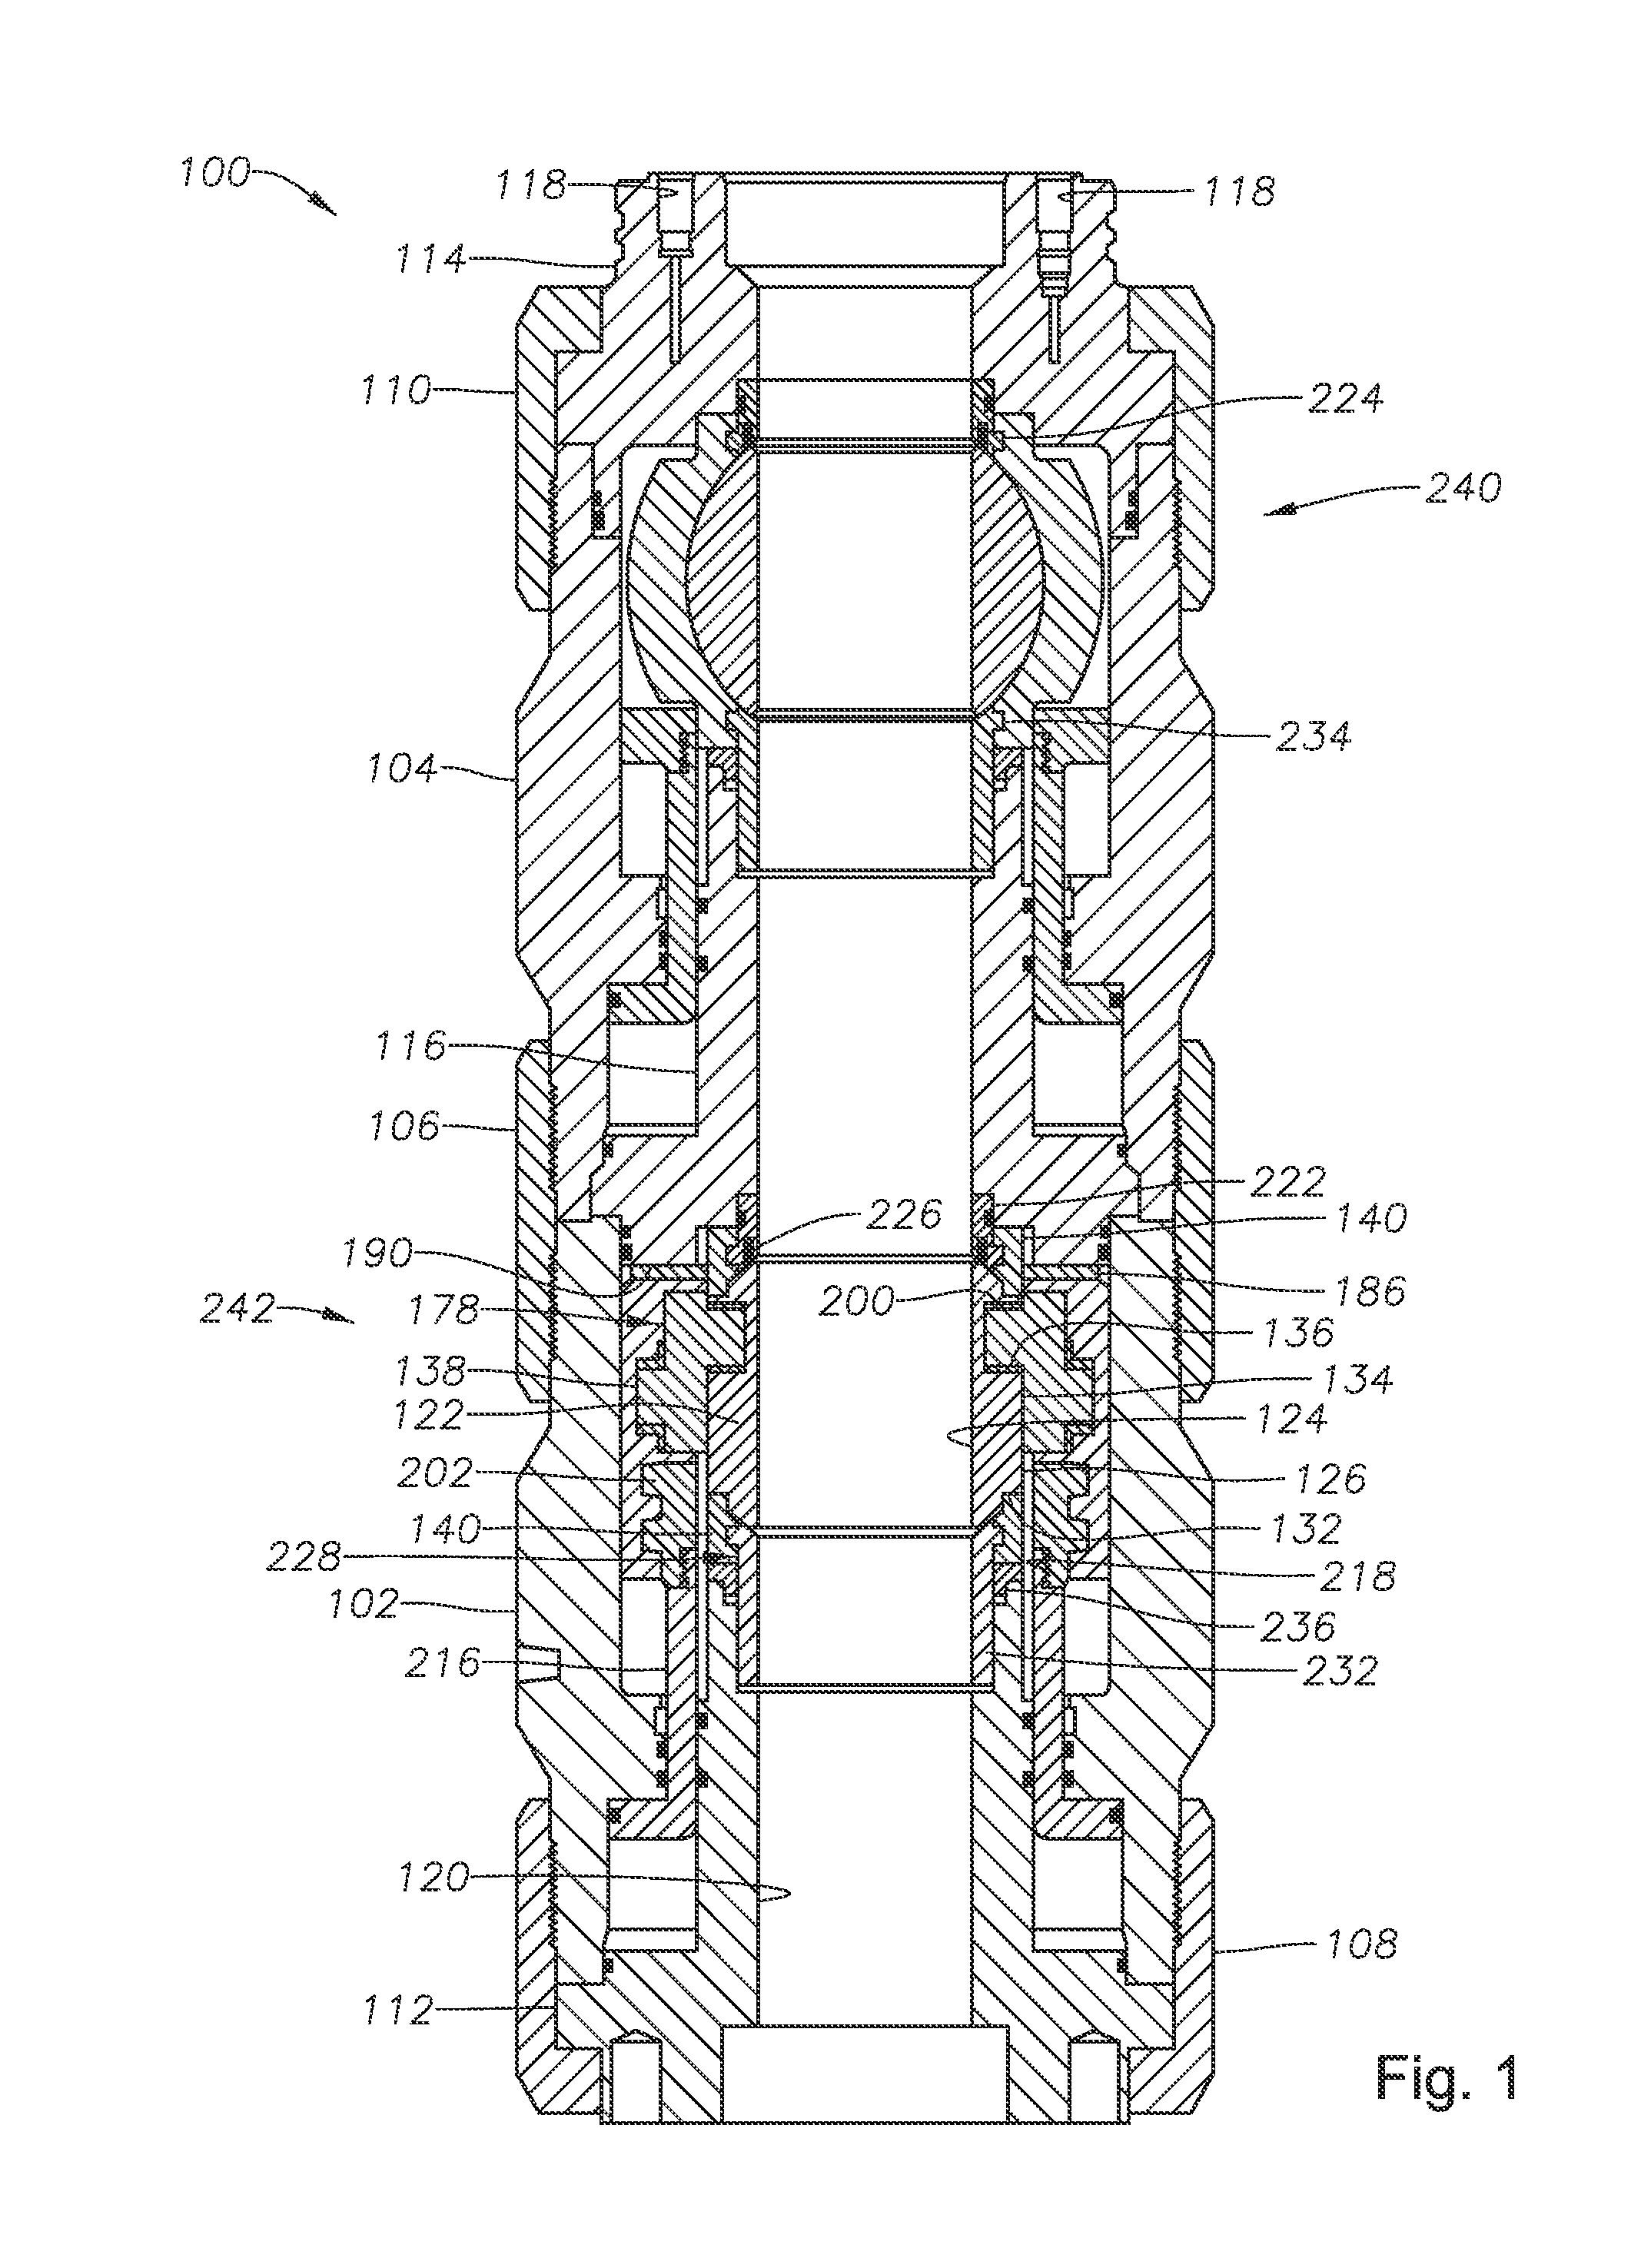 Ball valve enclosure and drive mechanism